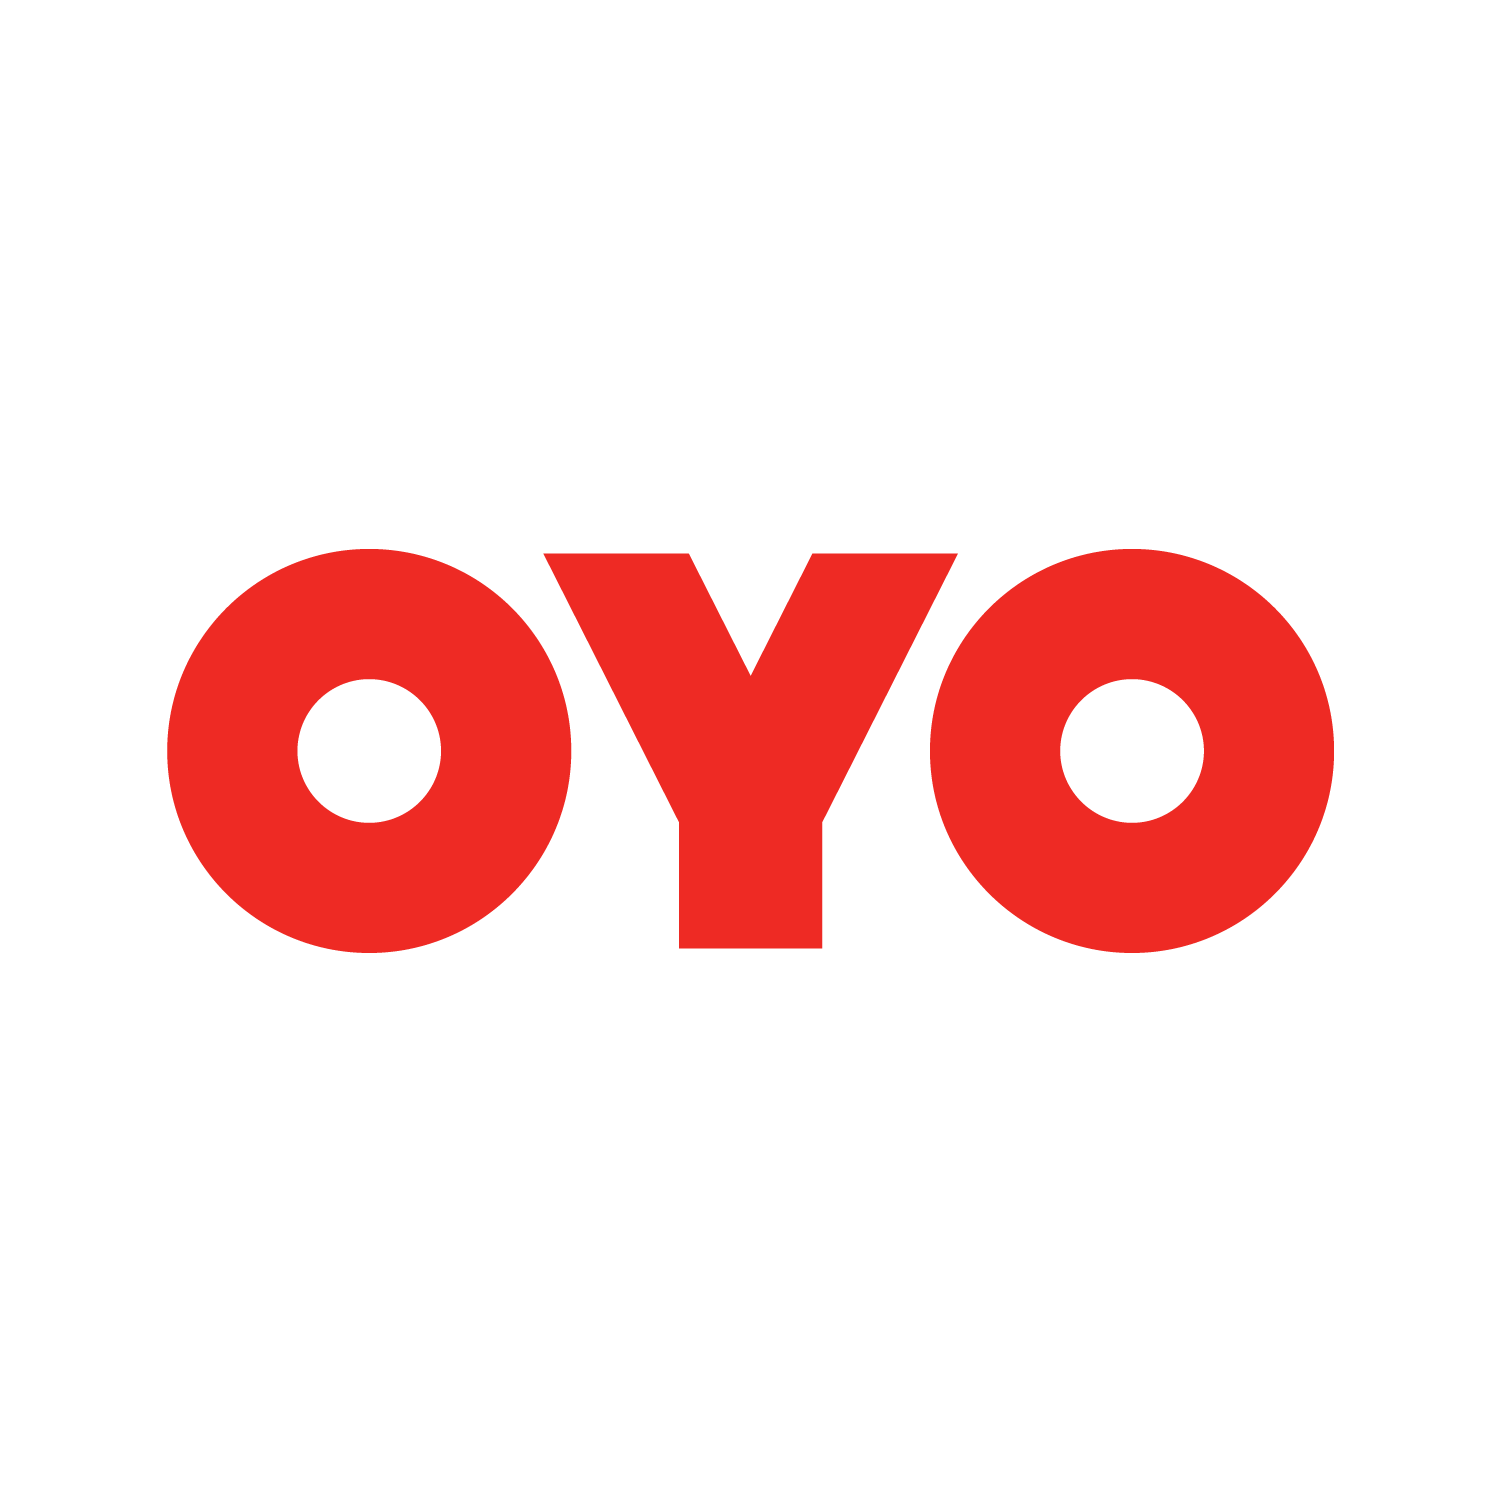 Oyo First Time Booking Offer 100% Cashback